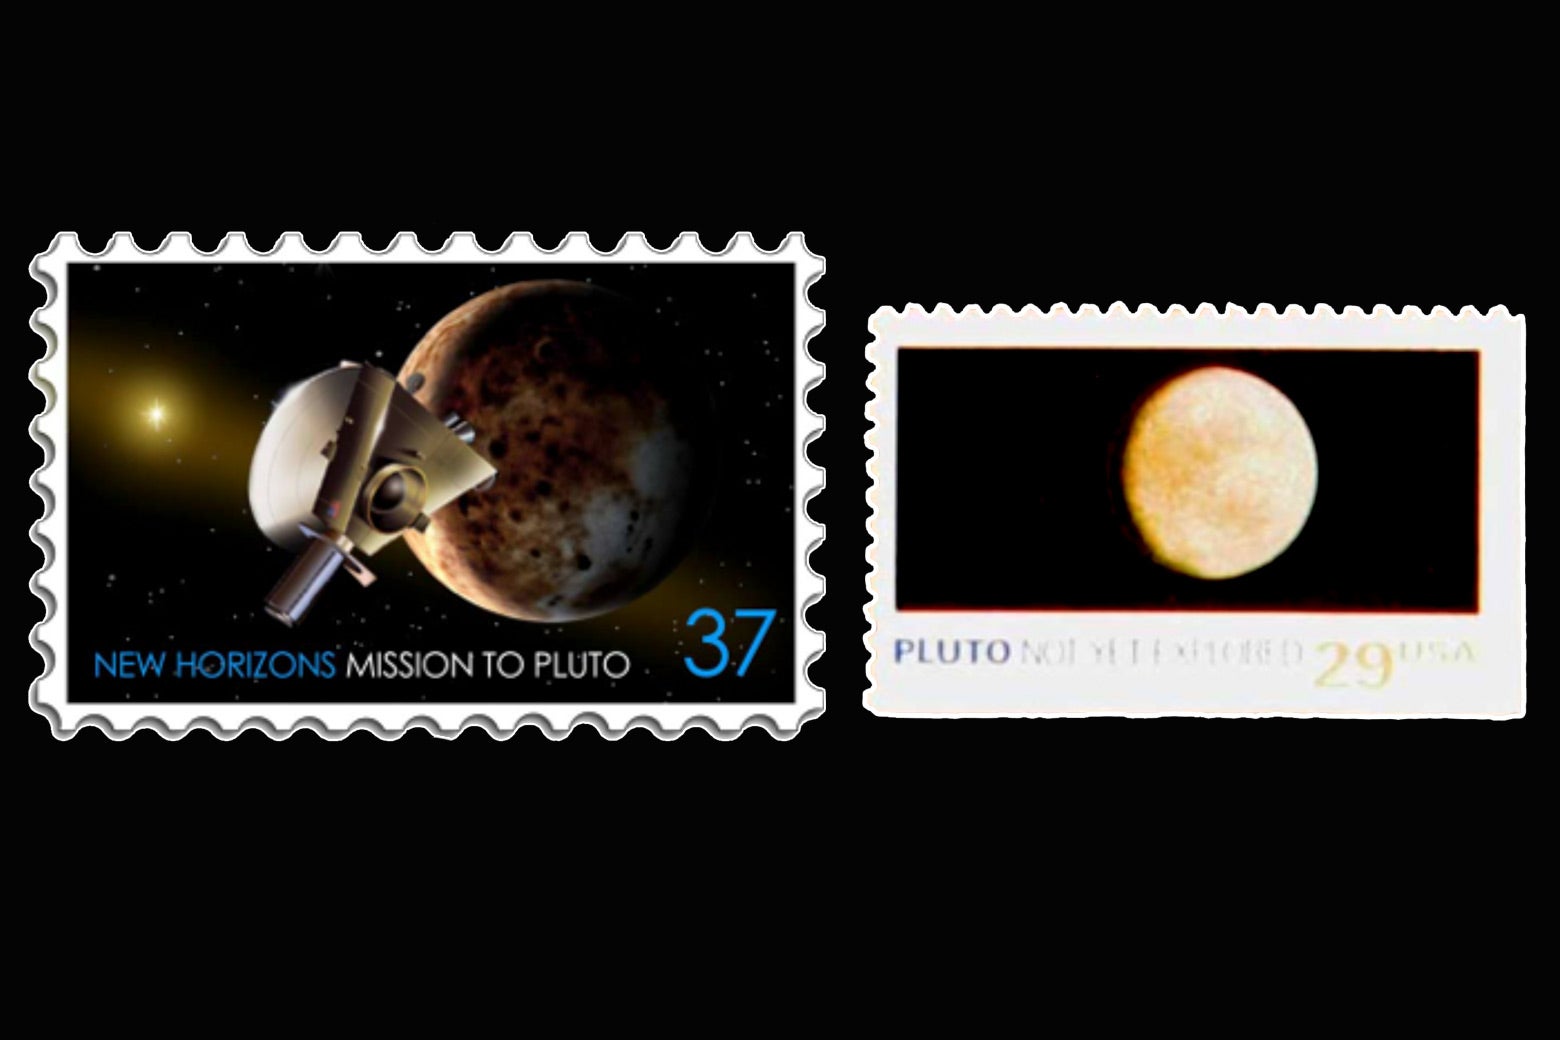 Two U.S. postage stamps included as cargo on New Horizons.